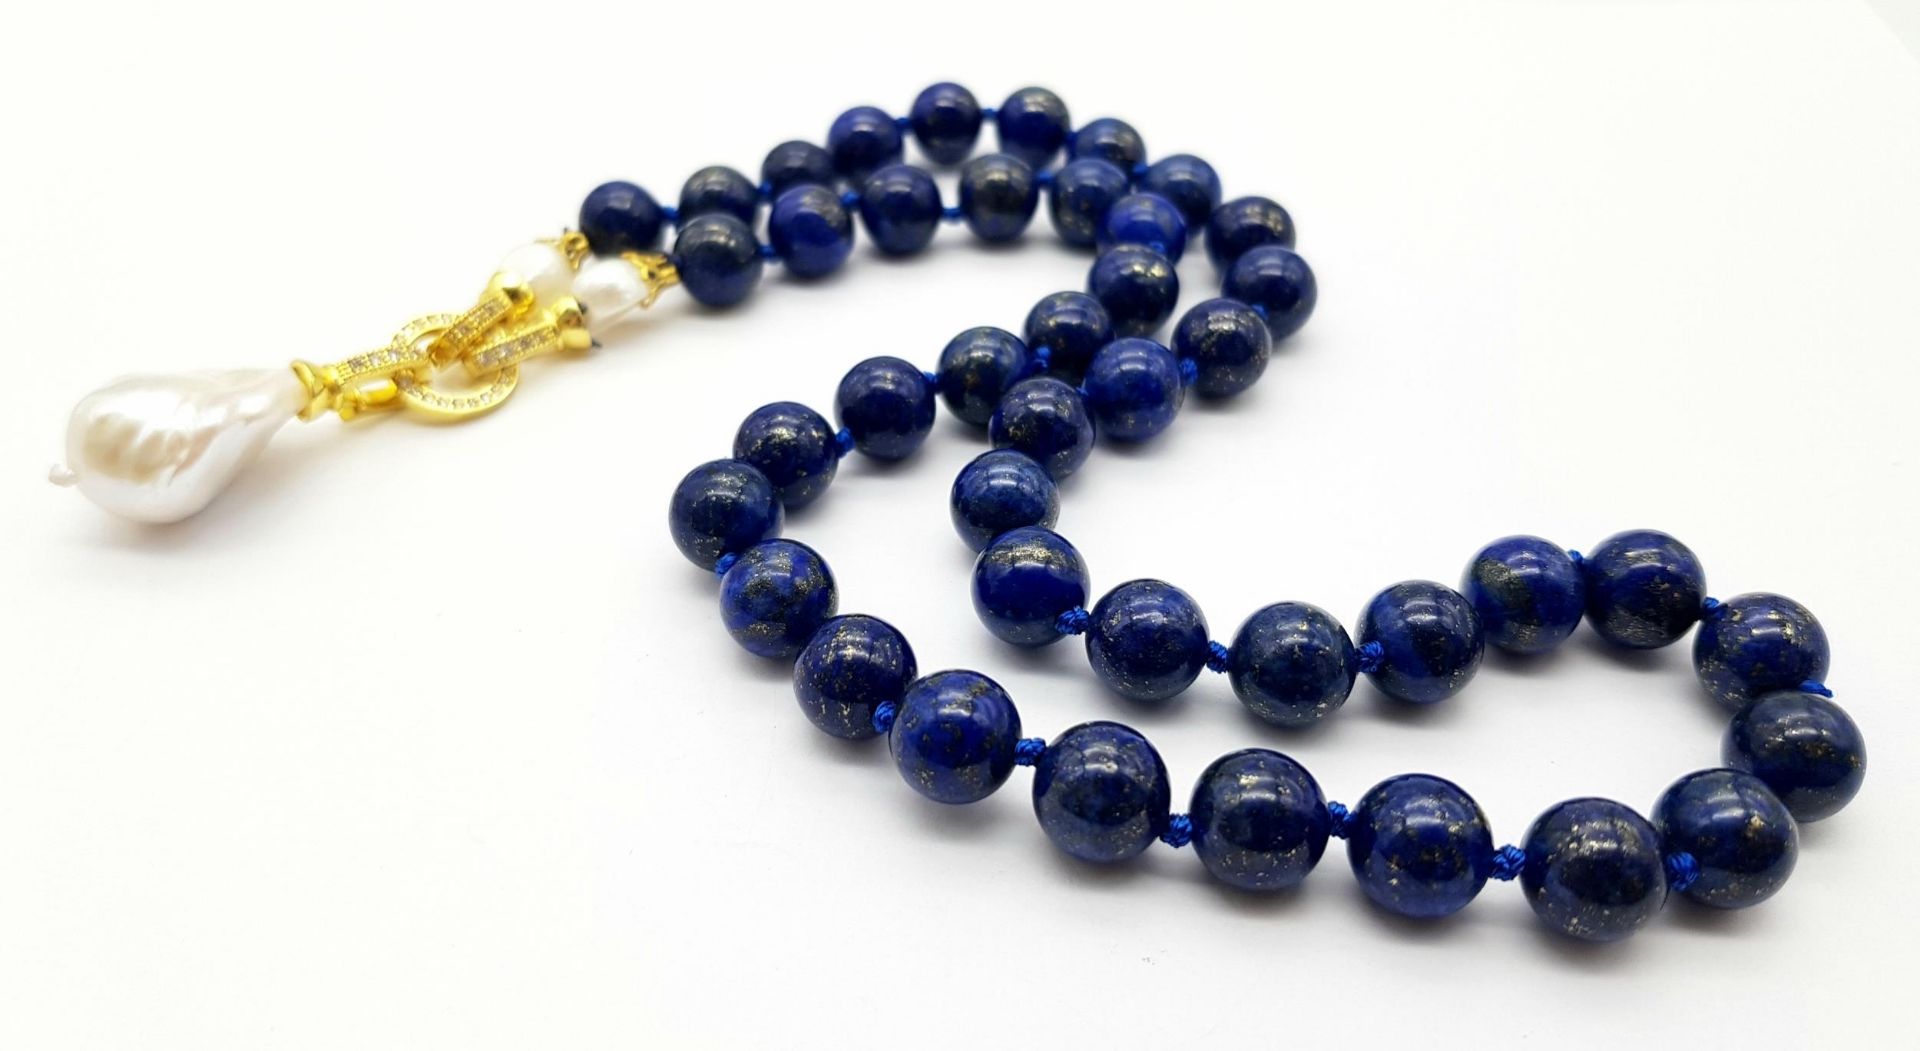 A Lapis Lazuli Beaded Necklace with Baroque Pearl Pendant. 10mm beads. Pendant - 6cm. Necklace - Image 4 of 4